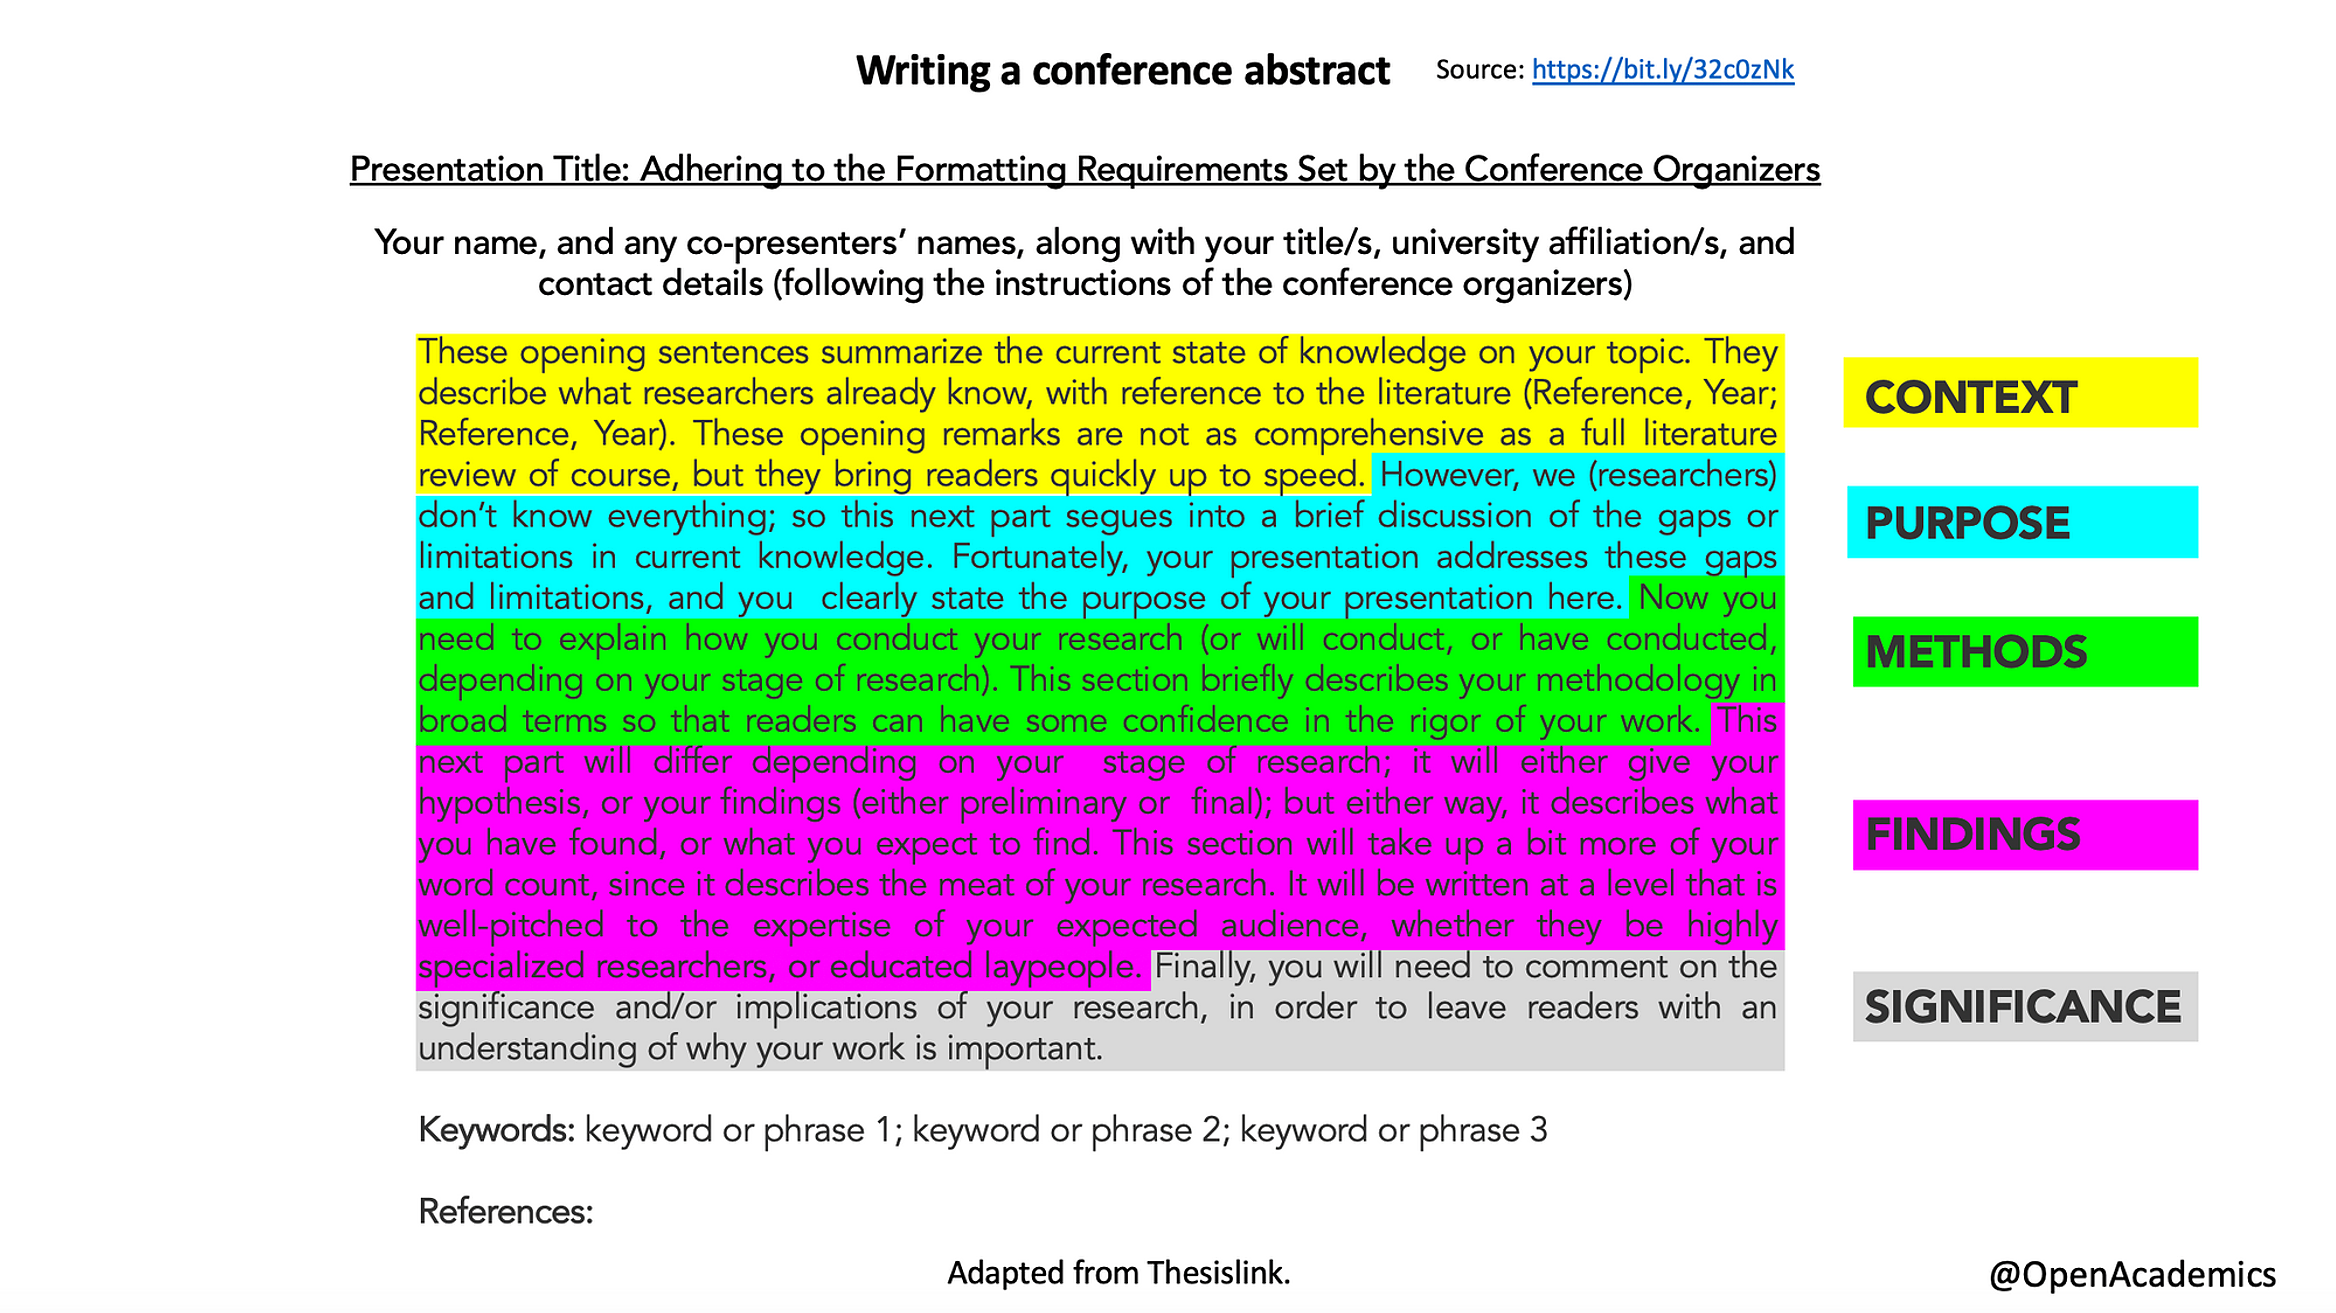 Writing a conference sbatrect.png